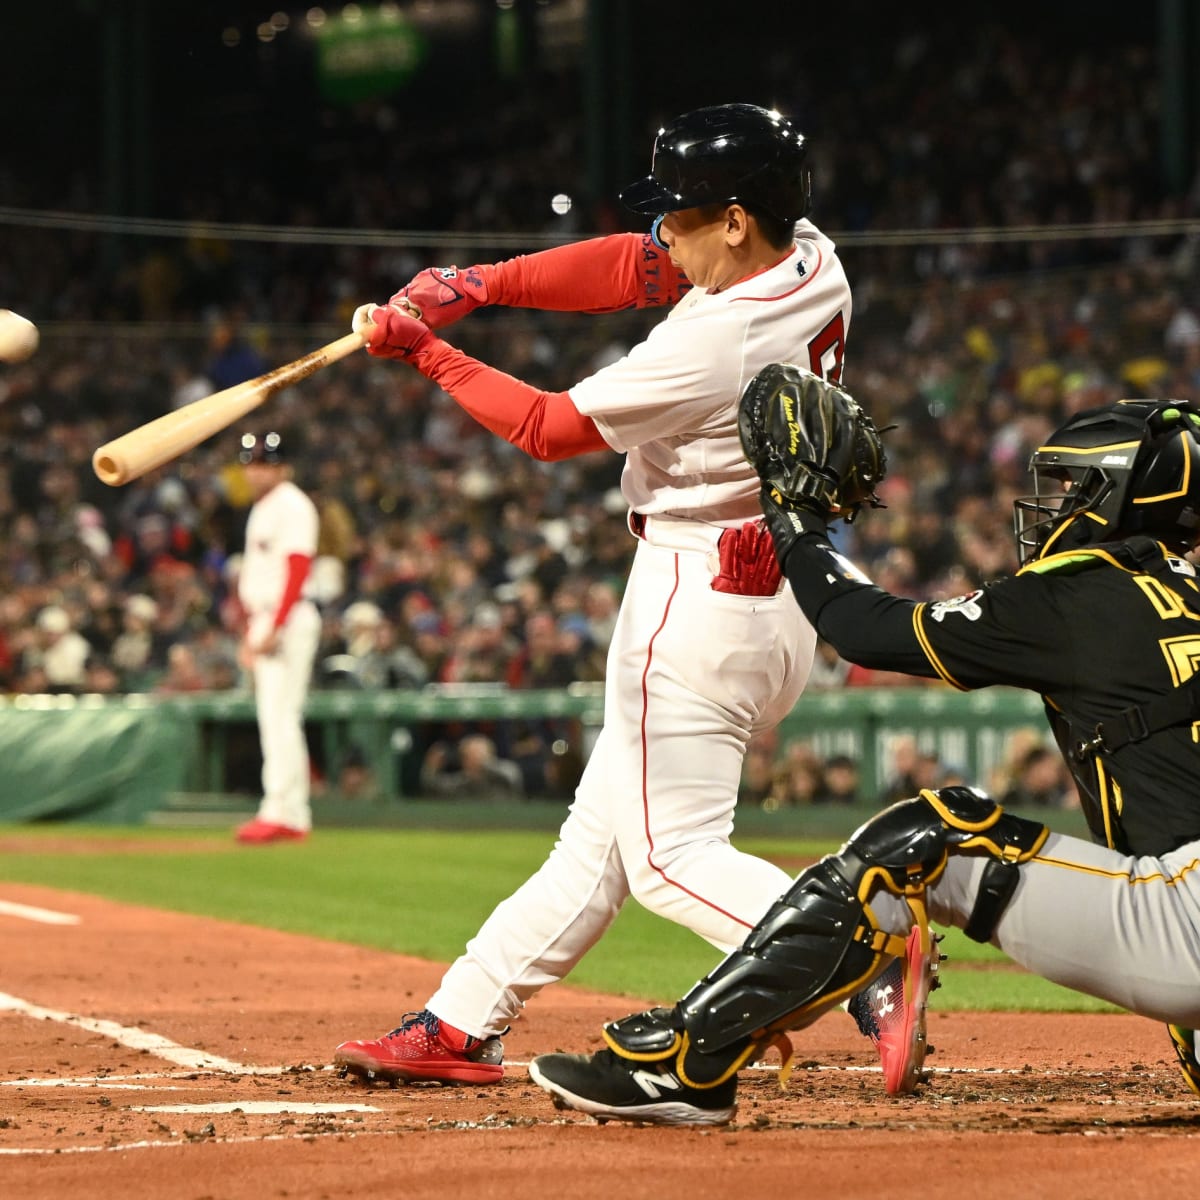 WATCH: Red Sox rookie Triston Casas launches first career home run vs. Rays  